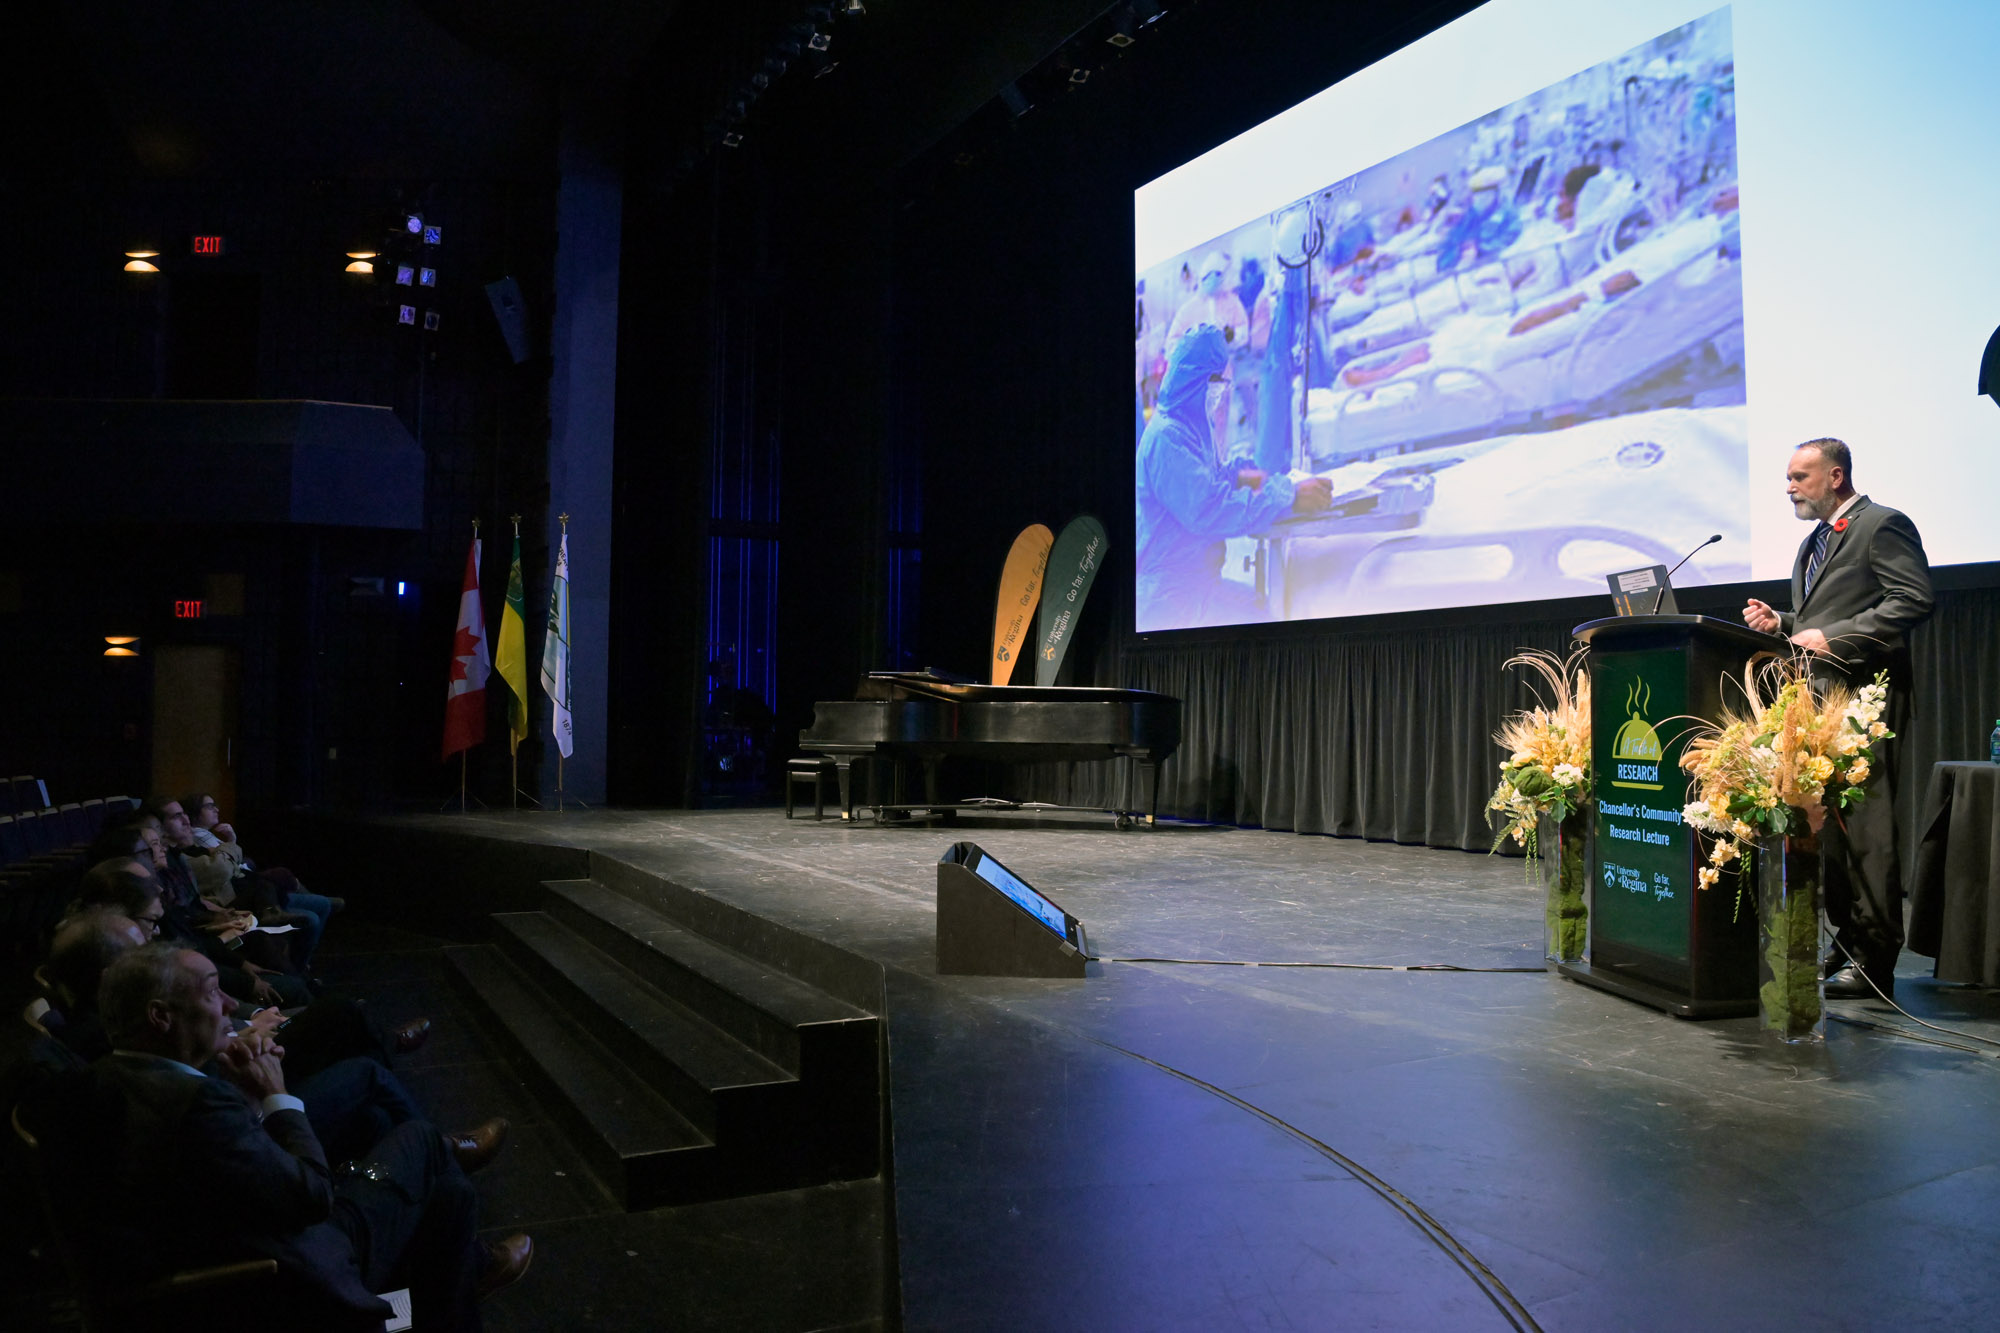 Extra wide shot of stage with podium and screen with presentation material. 